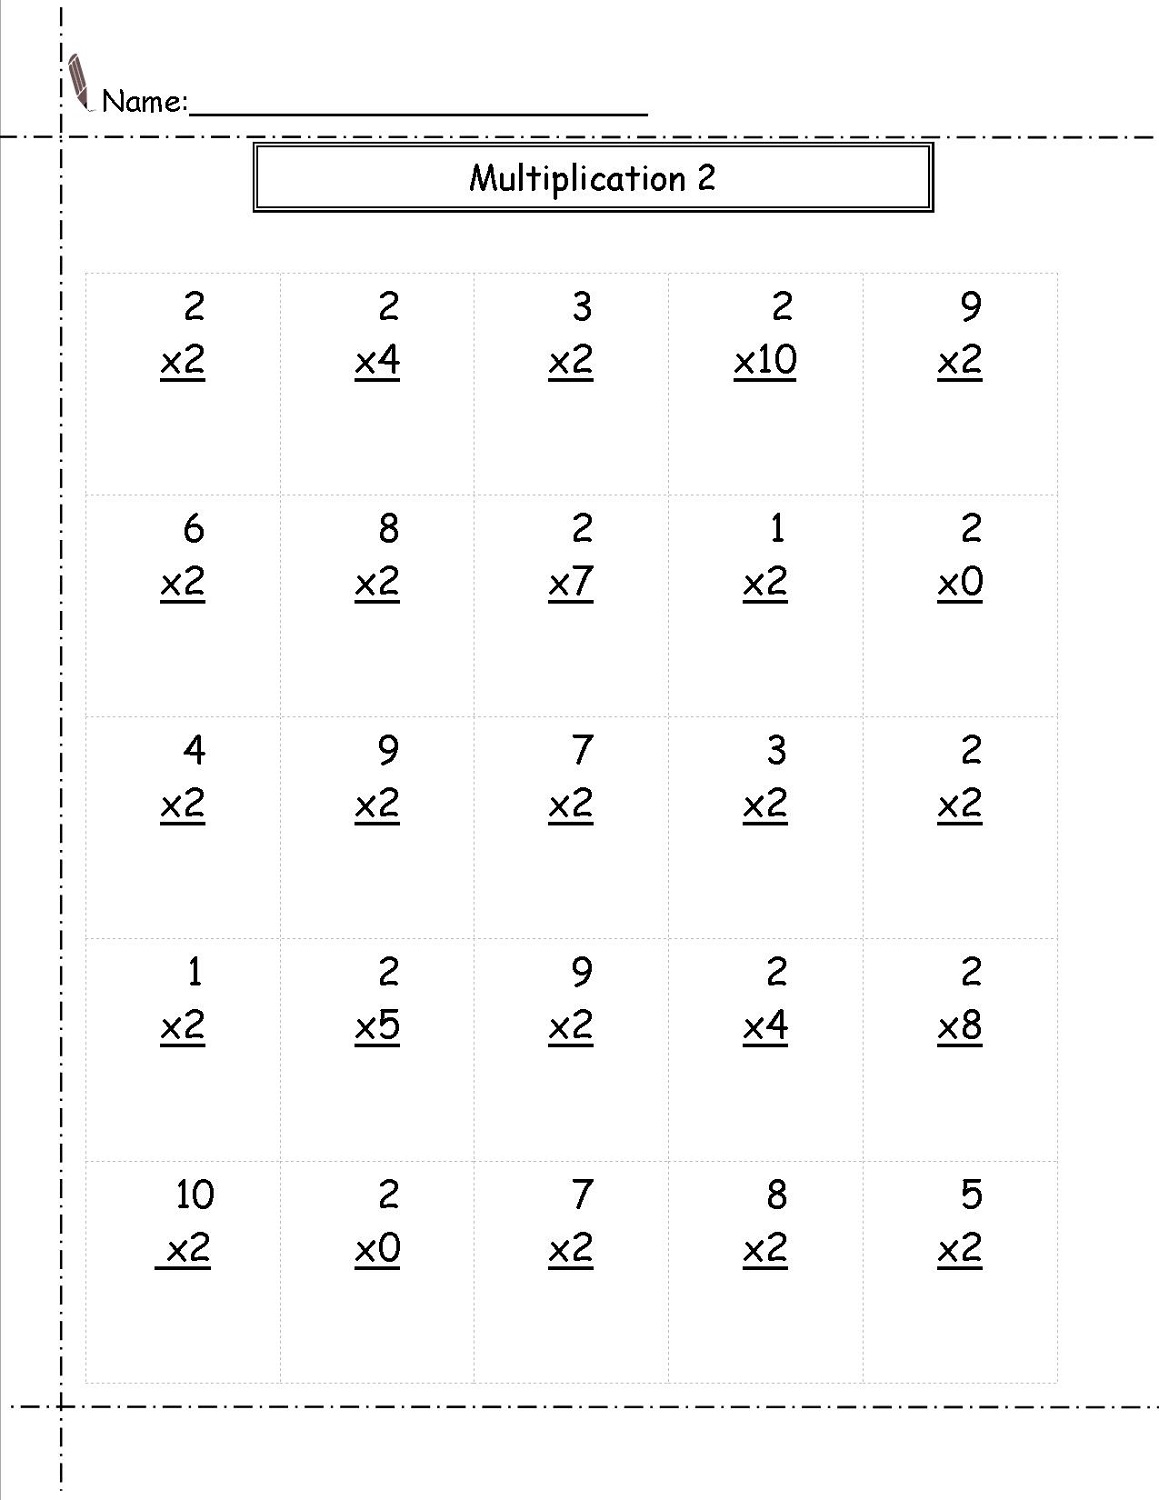 Printable 2 Times Table Worksheets | Activity Shelter